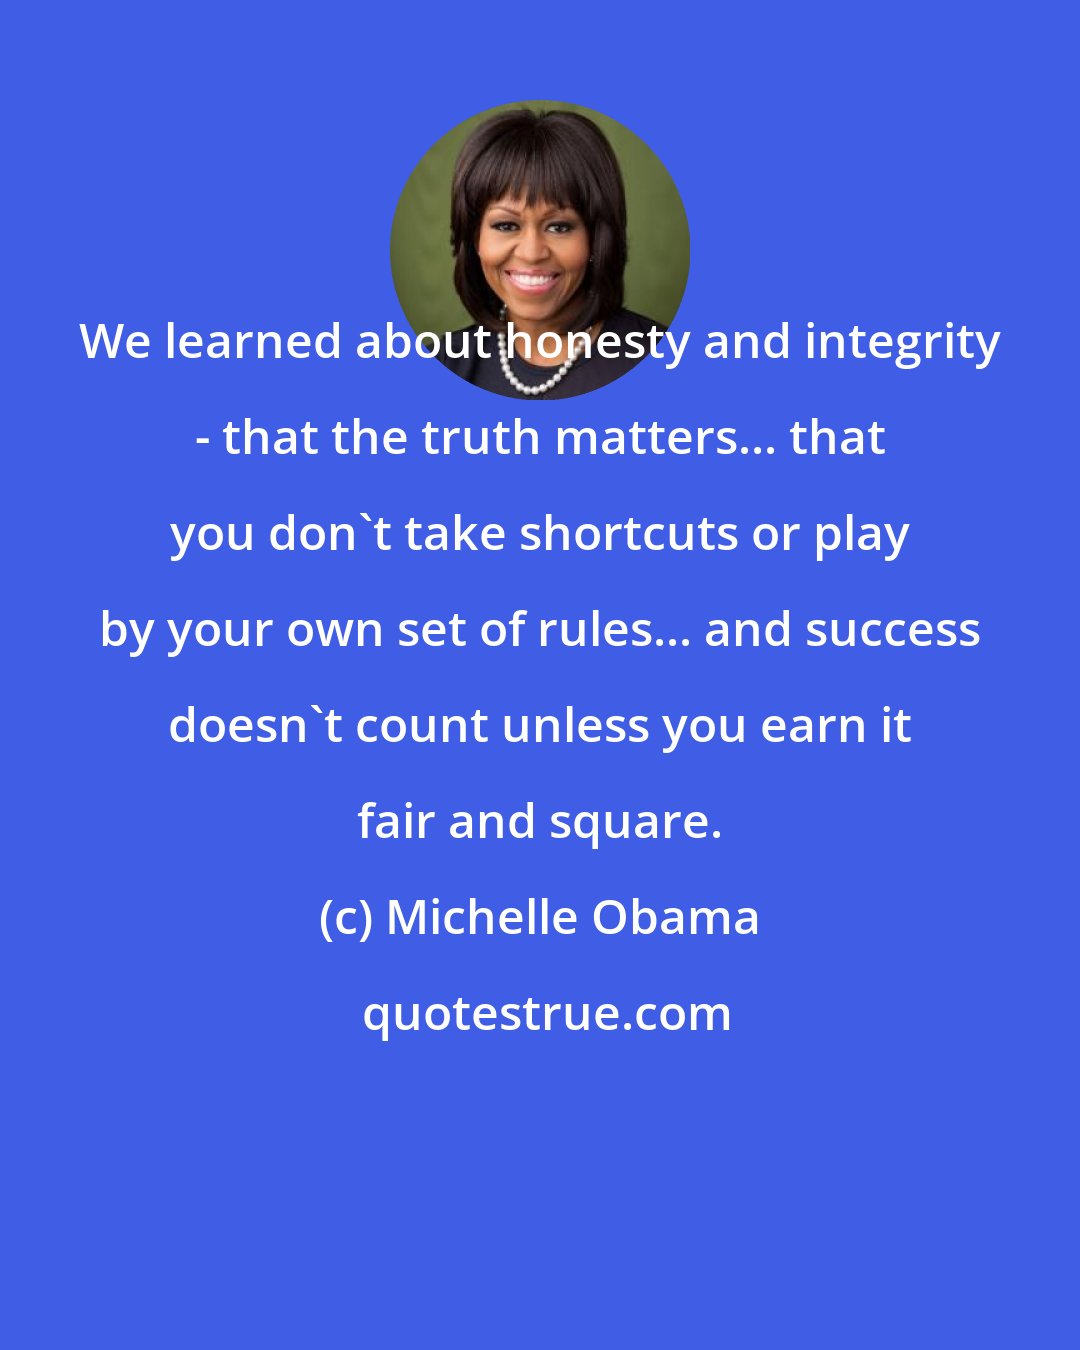 Michelle Obama: We learned about honesty and integrity - that the truth matters... that you don't take shortcuts or play by your own set of rules... and success doesn't count unless you earn it fair and square.